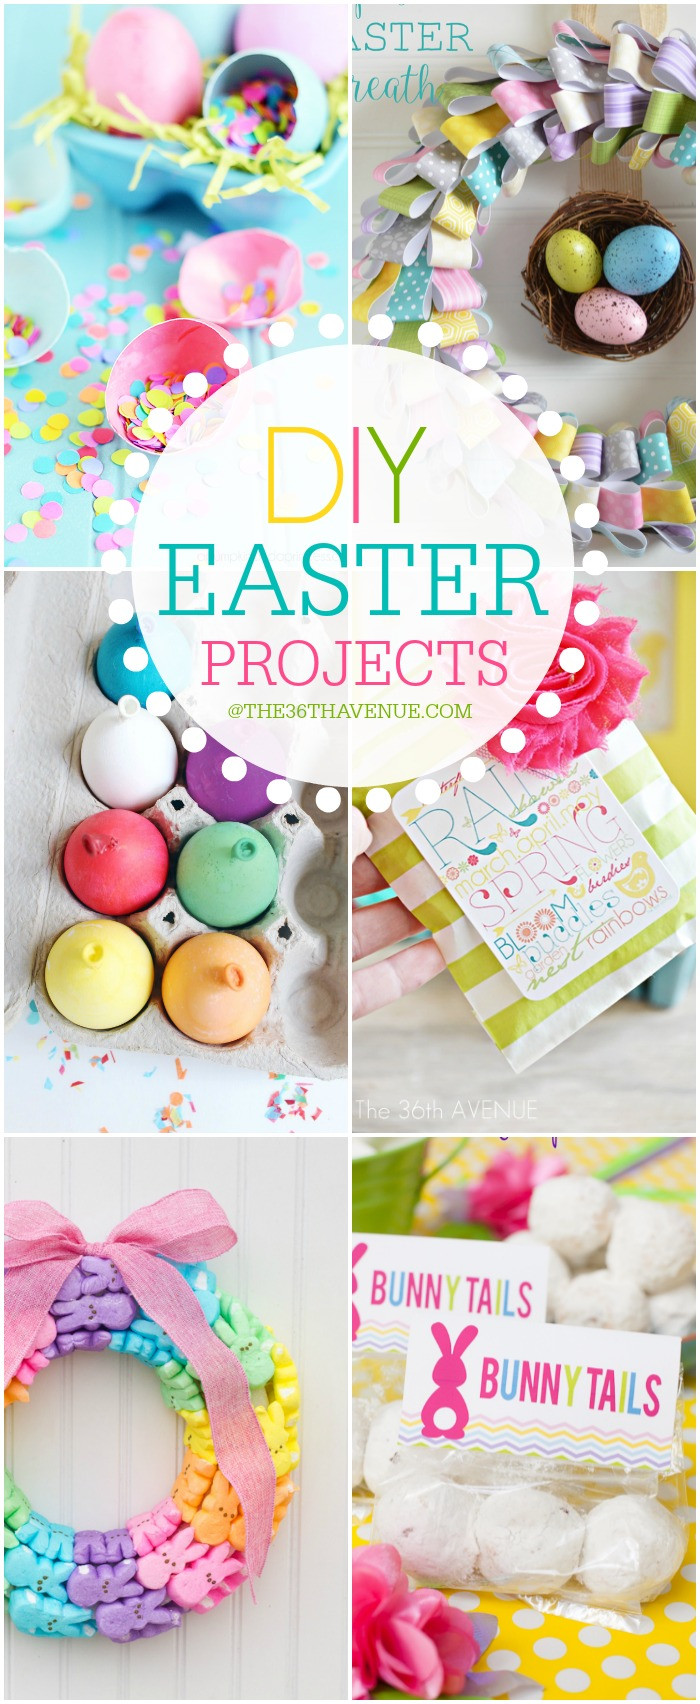 Easter Activity Ideas
 The 36th AVENUE Easter Crafts and DIY Decor Ideas